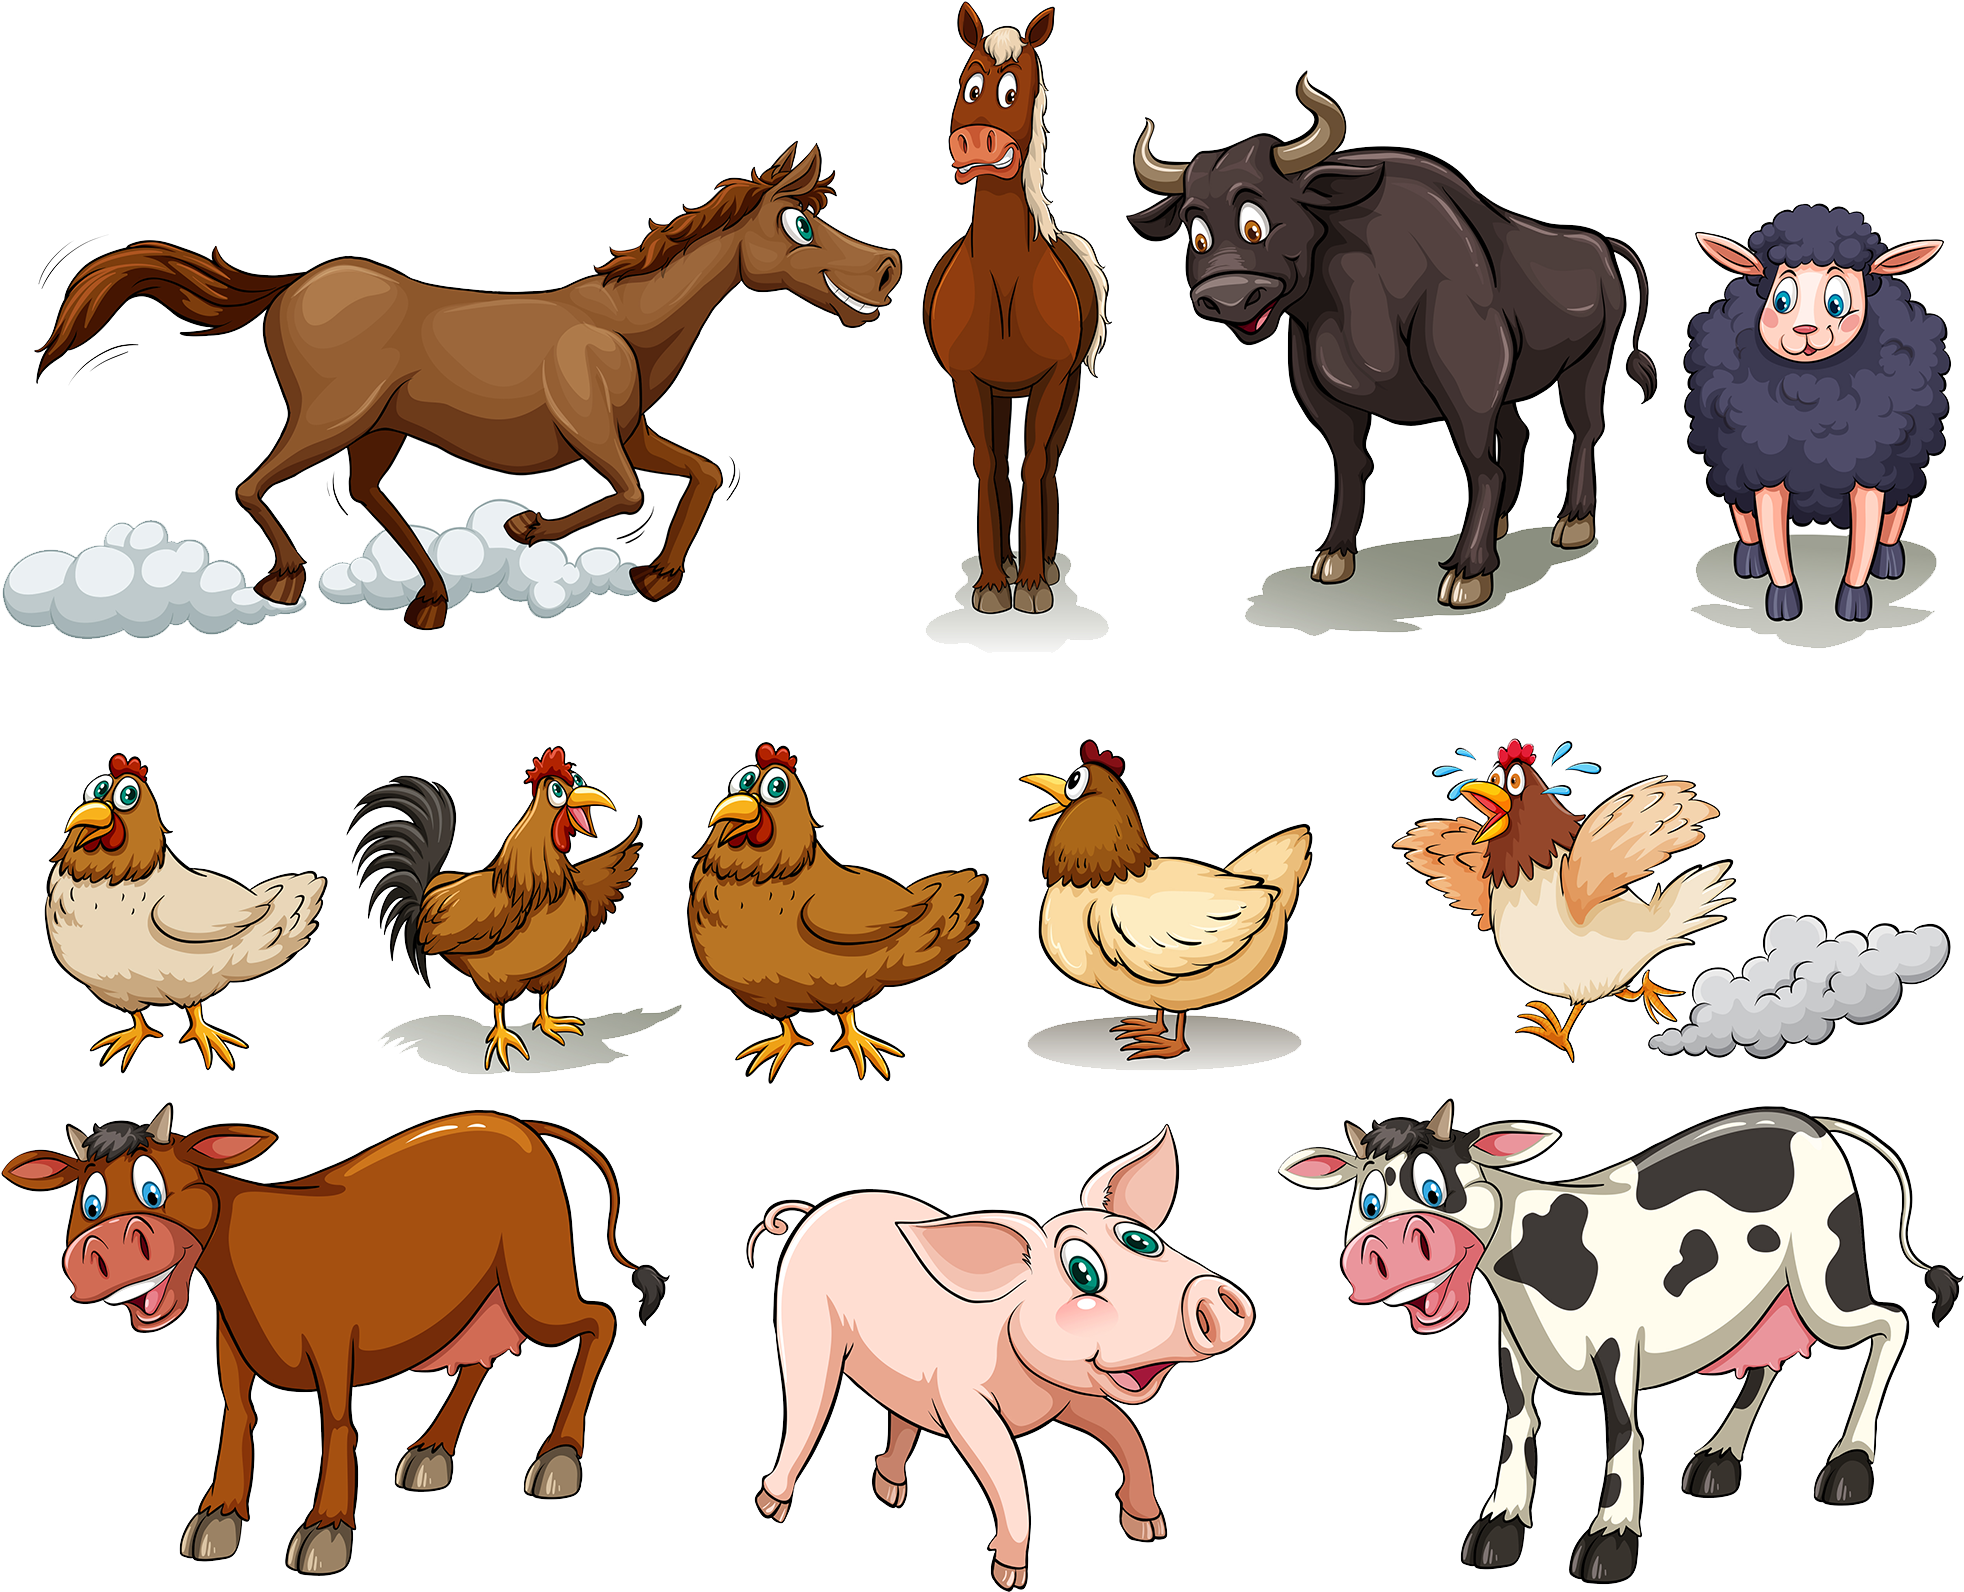 Cattle Chicken Sheep Domestic Pig Horse - Different Kinds Of Farm Animals (2000x1640)